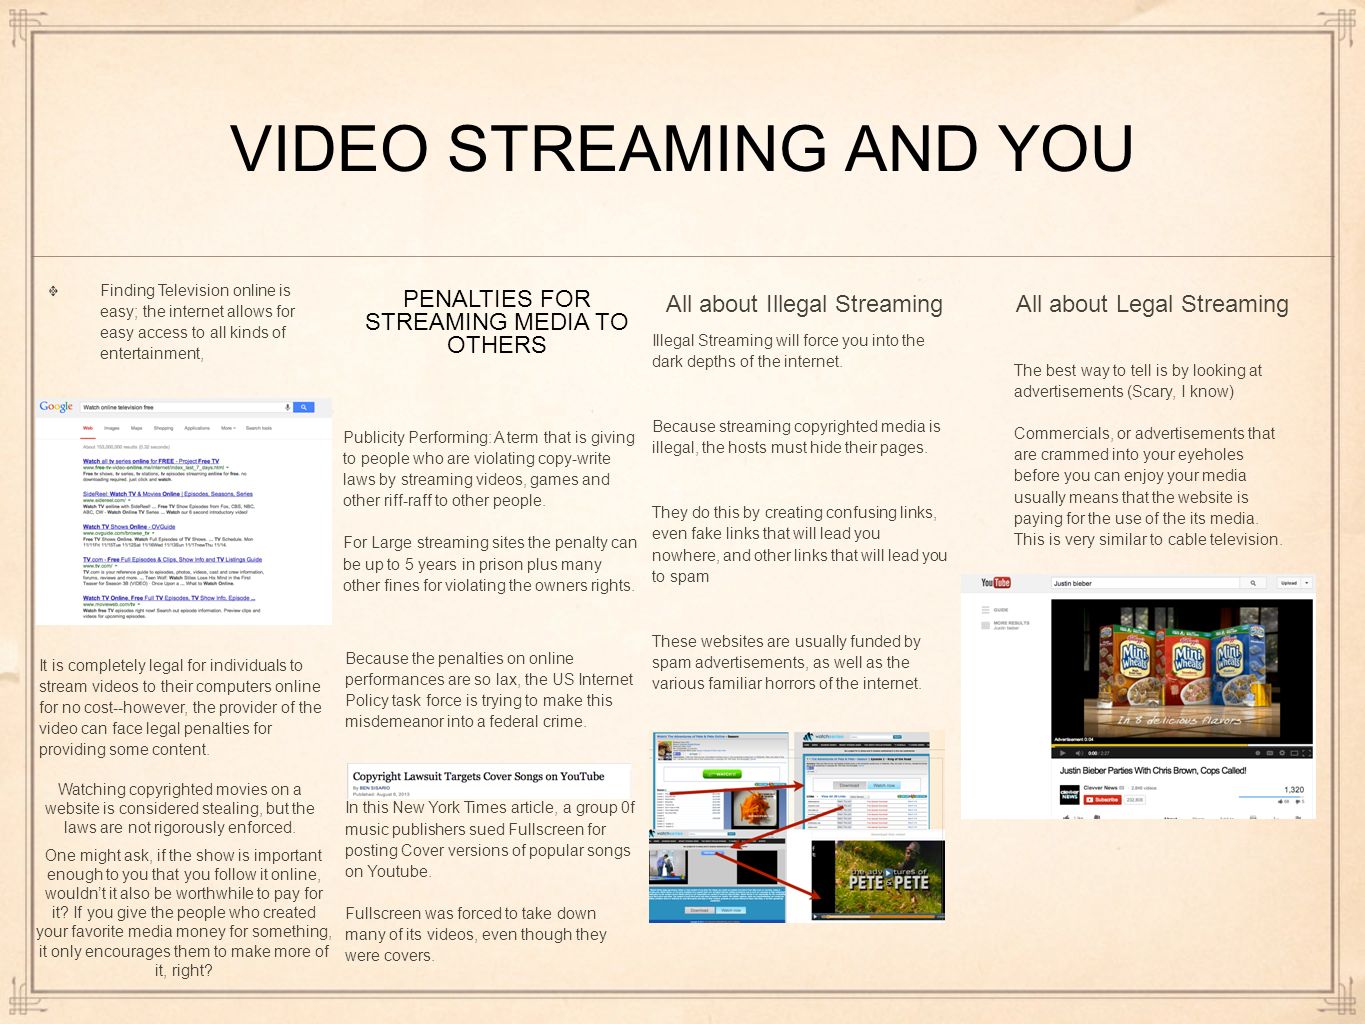 VIDEO STREAMING AND YOU It is completely legal for individuals to stream videos to their computers online for no cost--however, the provider of the video can face legal penalties for providing some content.